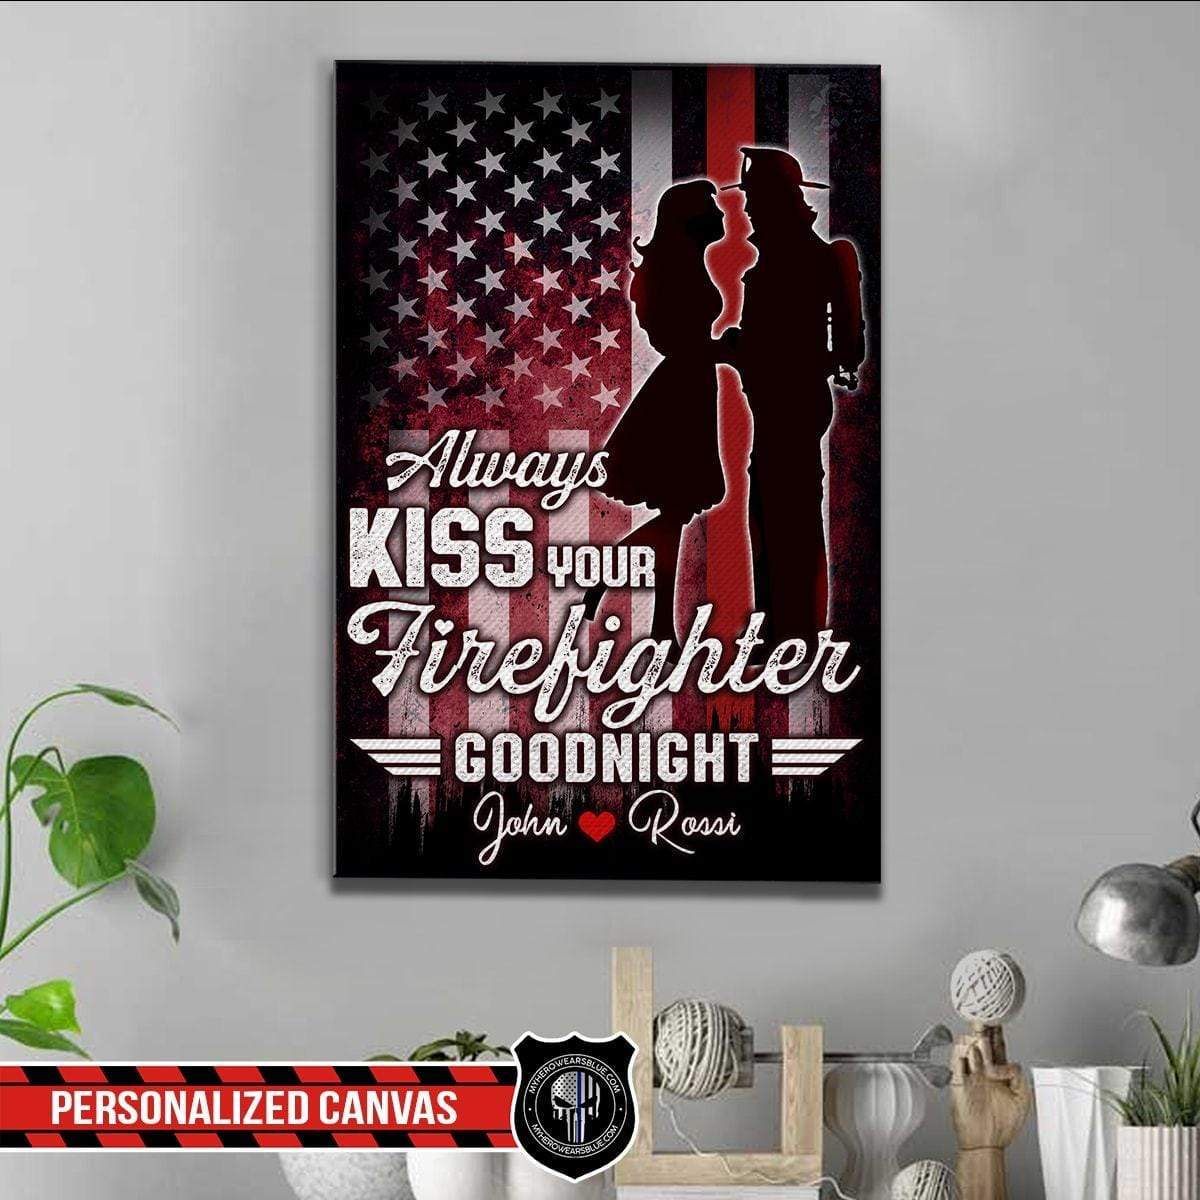 Personalized Cavas - Always Kiss Goodnight - Firefighter - Red Line Couple Custom Thin Red Line Poster Canvas - Valetine gift for him/husband